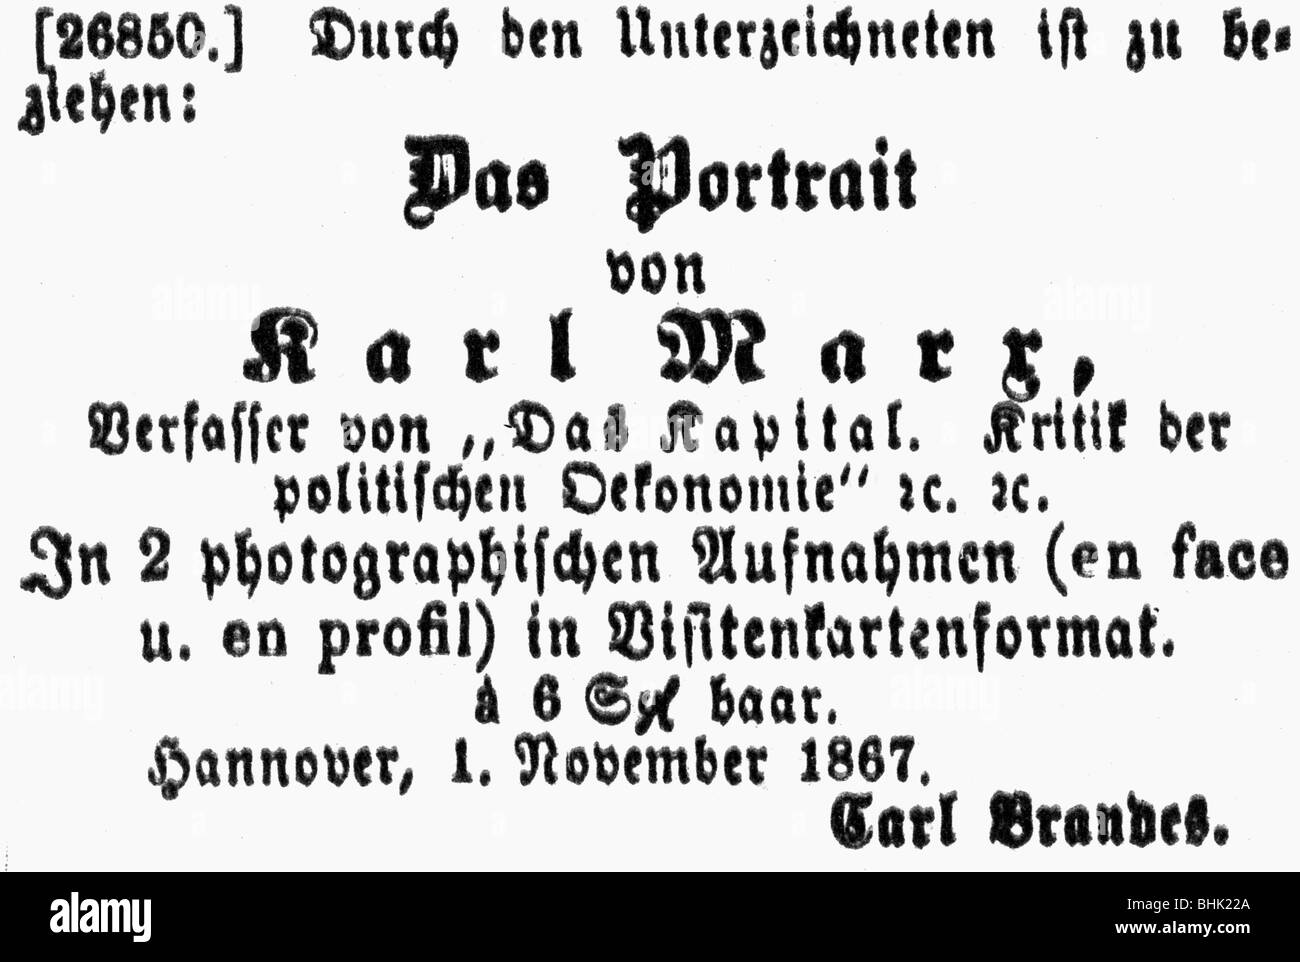 Marx, Karl, 5.5.1818 - 14.3.1883, German philosopher, advert for photograph of him by Carl Brandes, Hanover, 1867, , Stock Photo